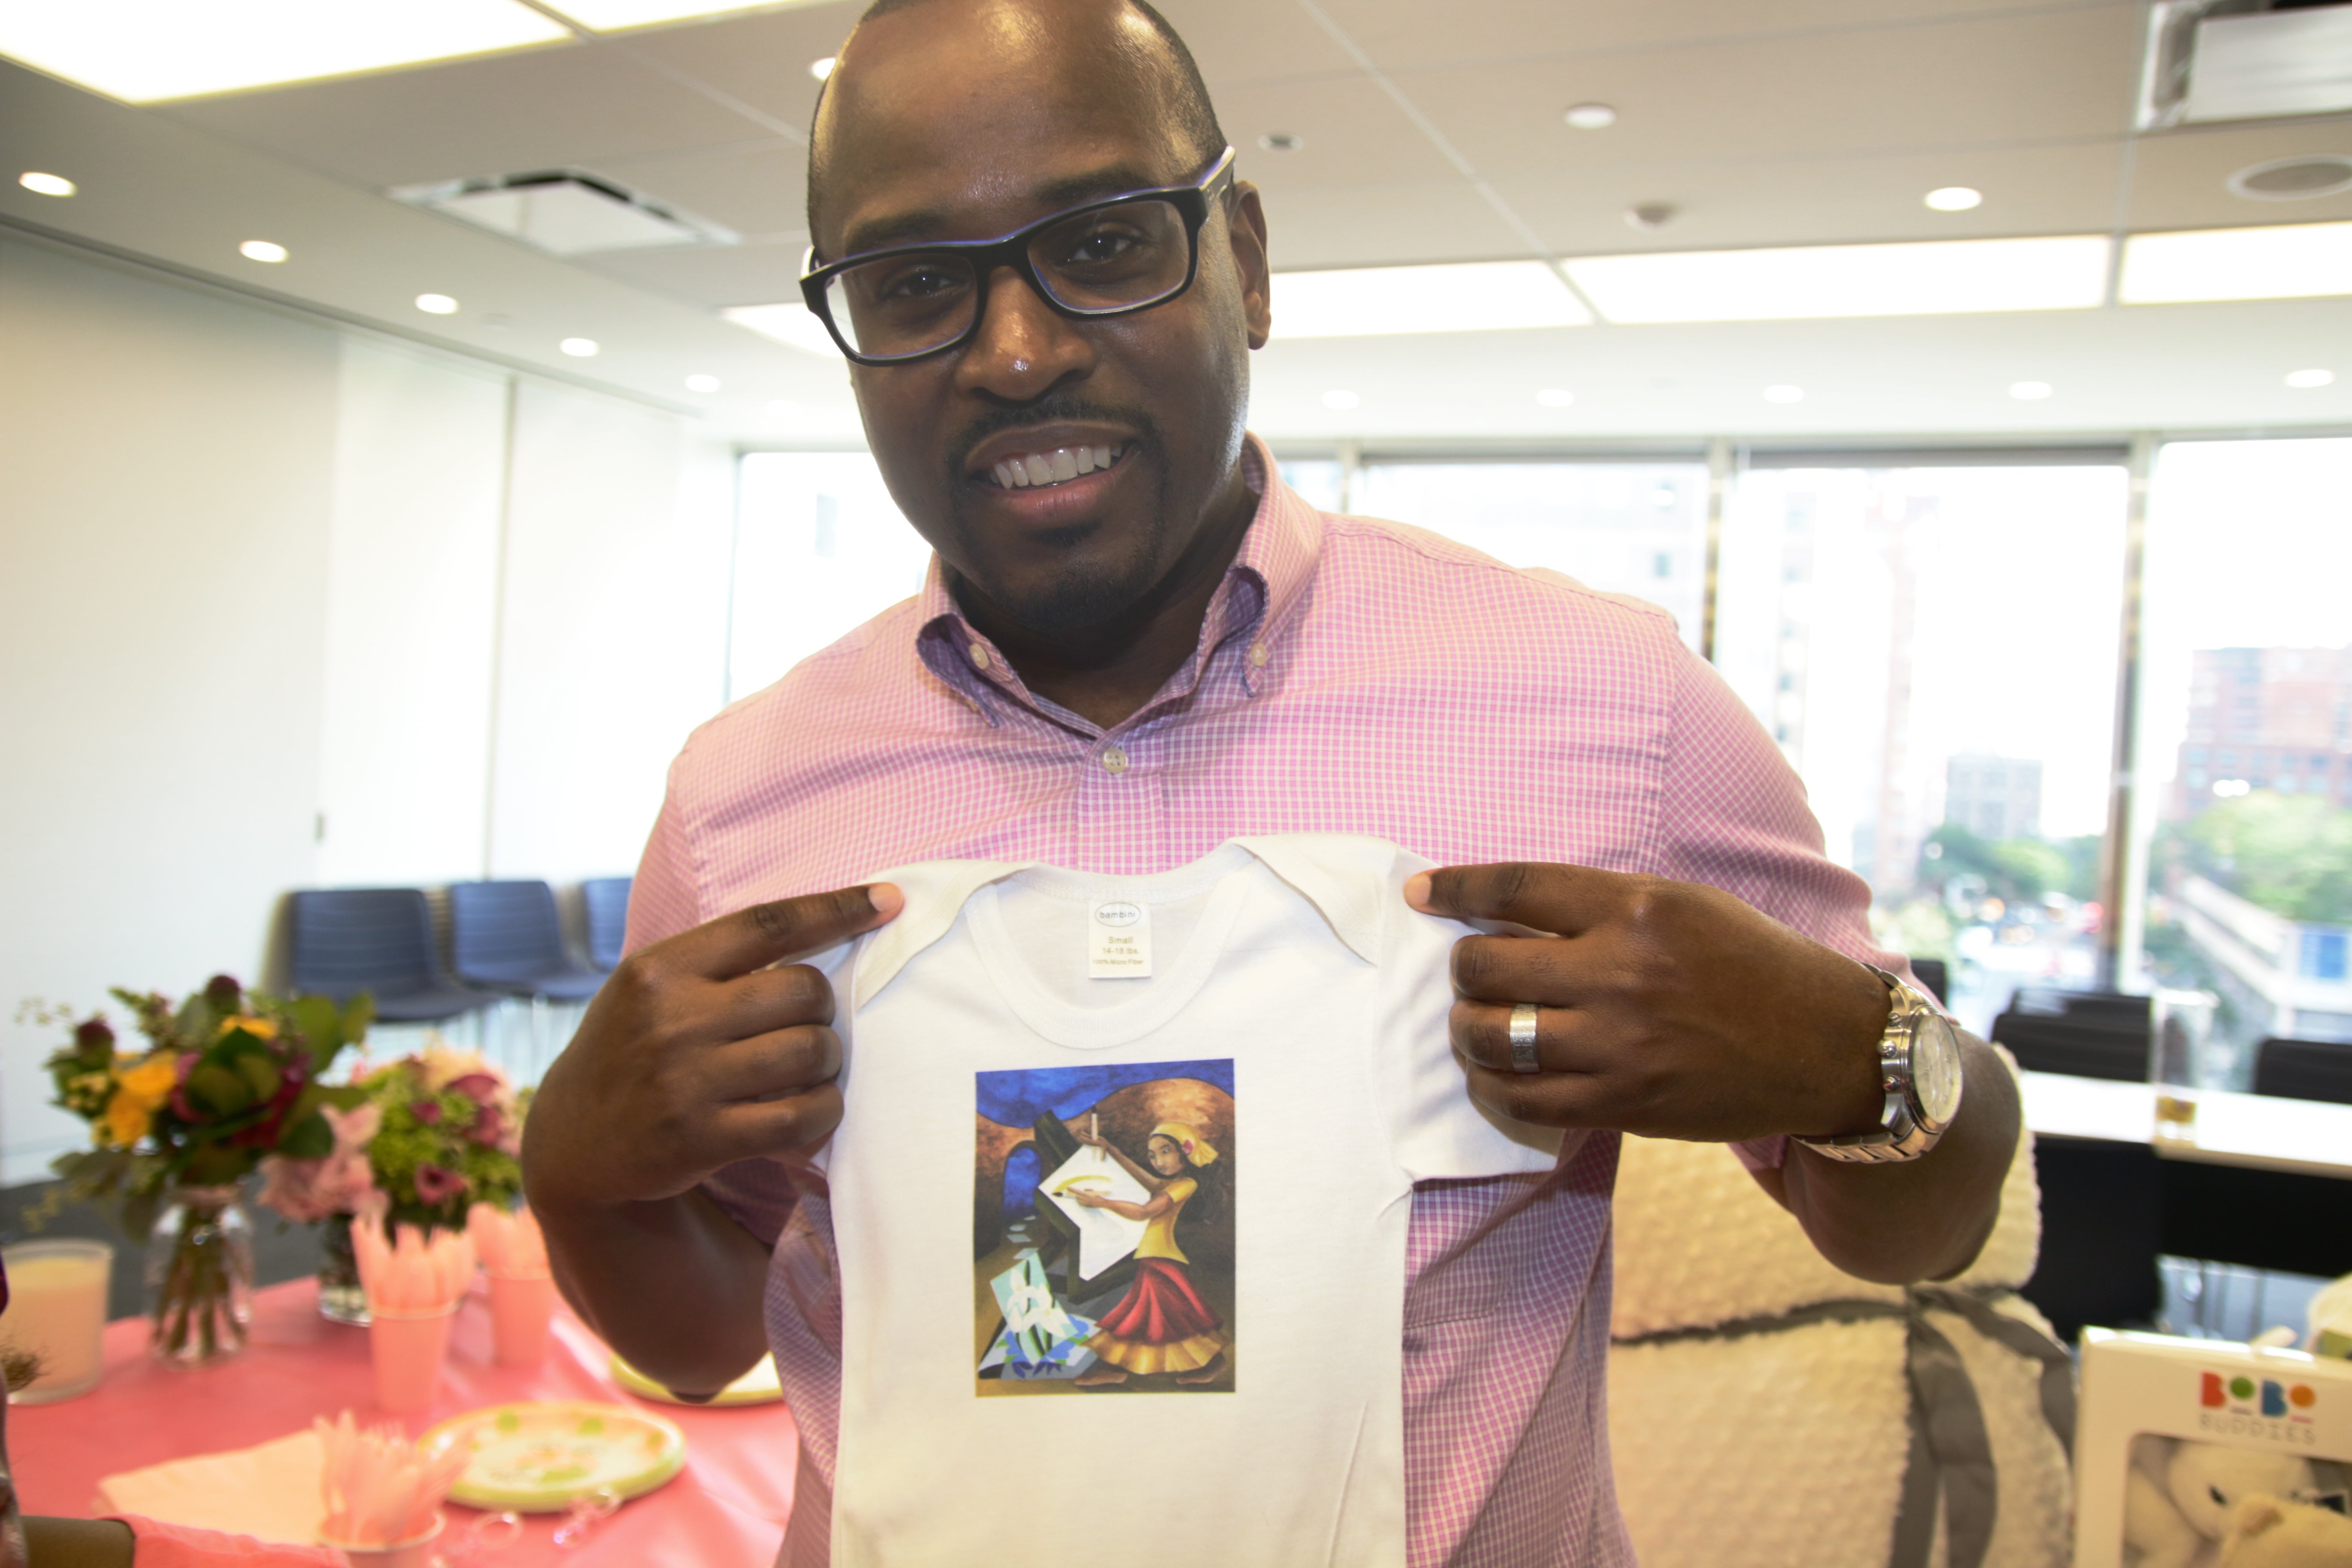 ESSENCE Is Having a Baby! Inside the Surprise Baby Shower for Our Storybook Couple
